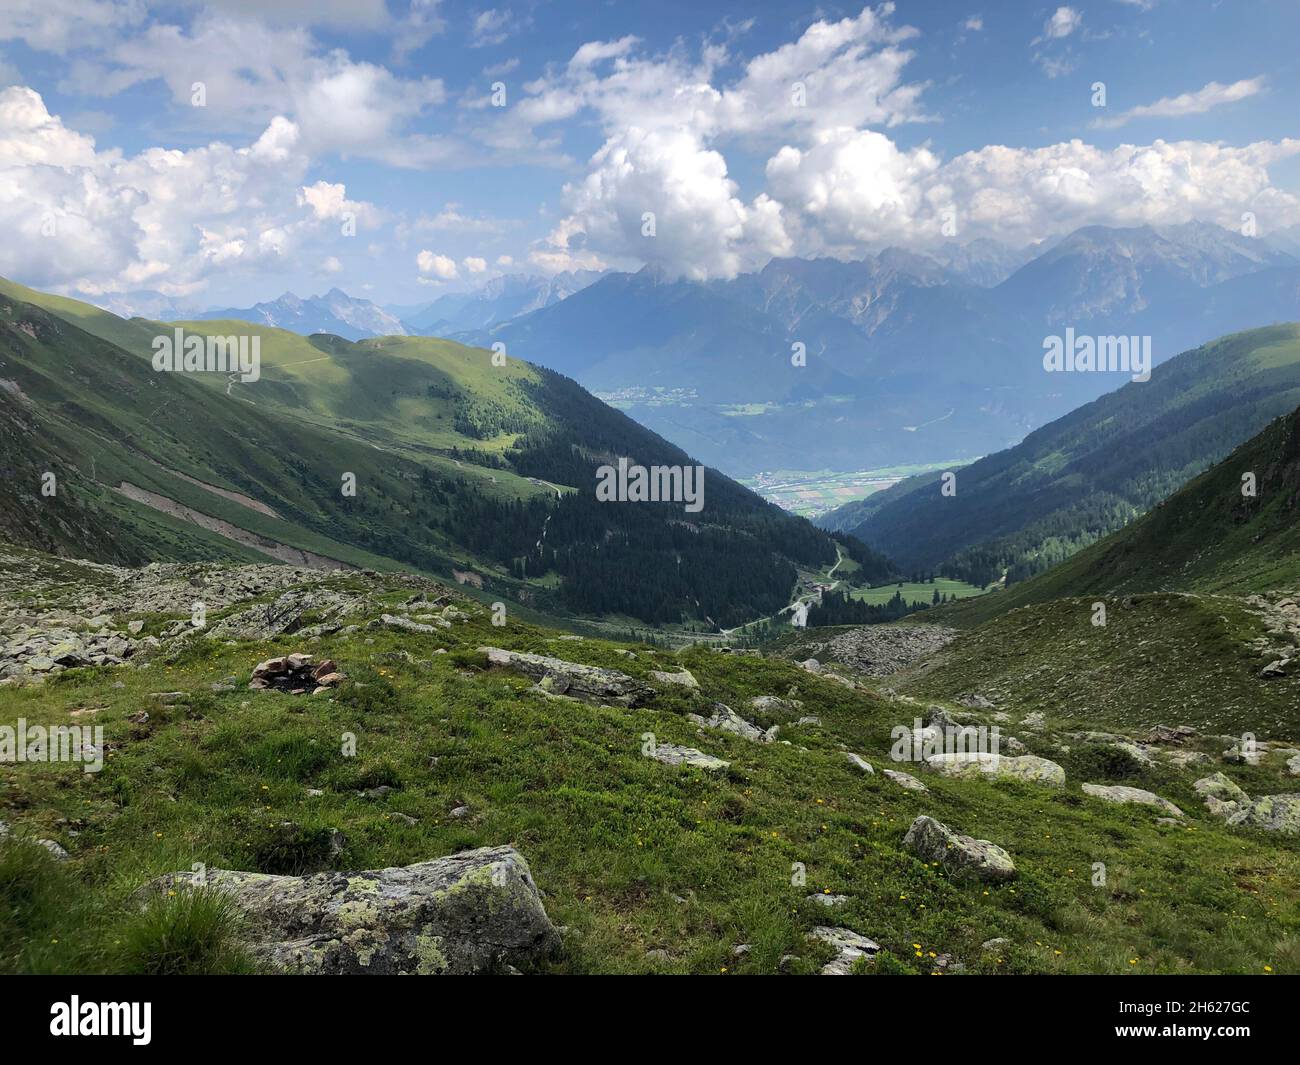 landscape above the inzinger alm,view of the karwendel and wetterstein mountains,mitterkogel,rosskogel,stubai alps,hunting lodge,seebach,meadows,mountains,nature,inzing,tyrol,austria Stock Photo